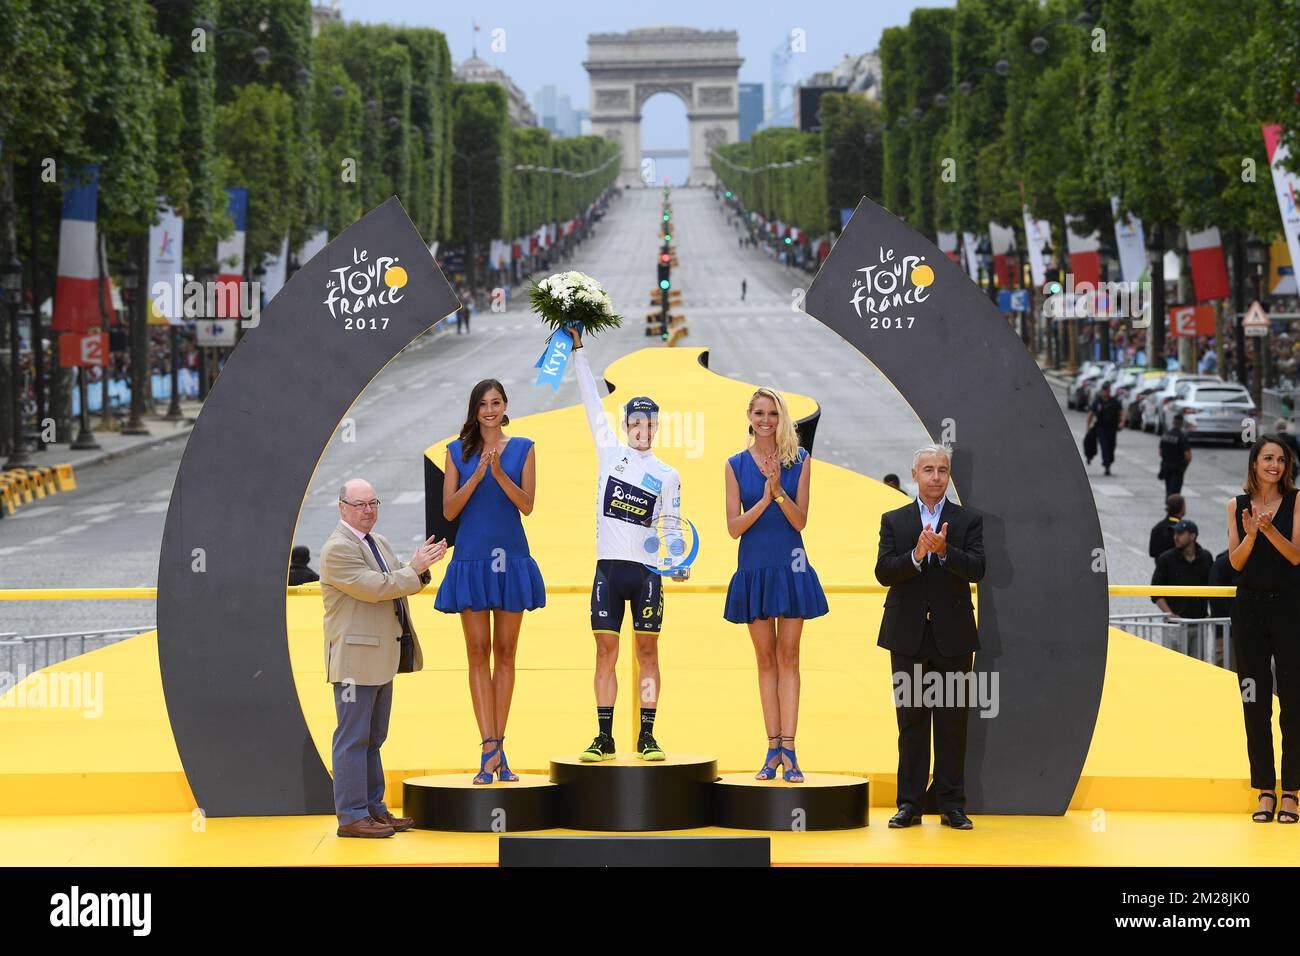 Great Britain Simon Yates of Orica - Scott celebrates on the podium in the white jersey for best young rider after the 104th edition of the Tour de France cycling race, in Paris, France, Sunday 23 July 2017. This year's Tour de France takes place from July first to July 23rd. BELGA PHOTO POOL FRANCK FAUGERE  Stock Photo